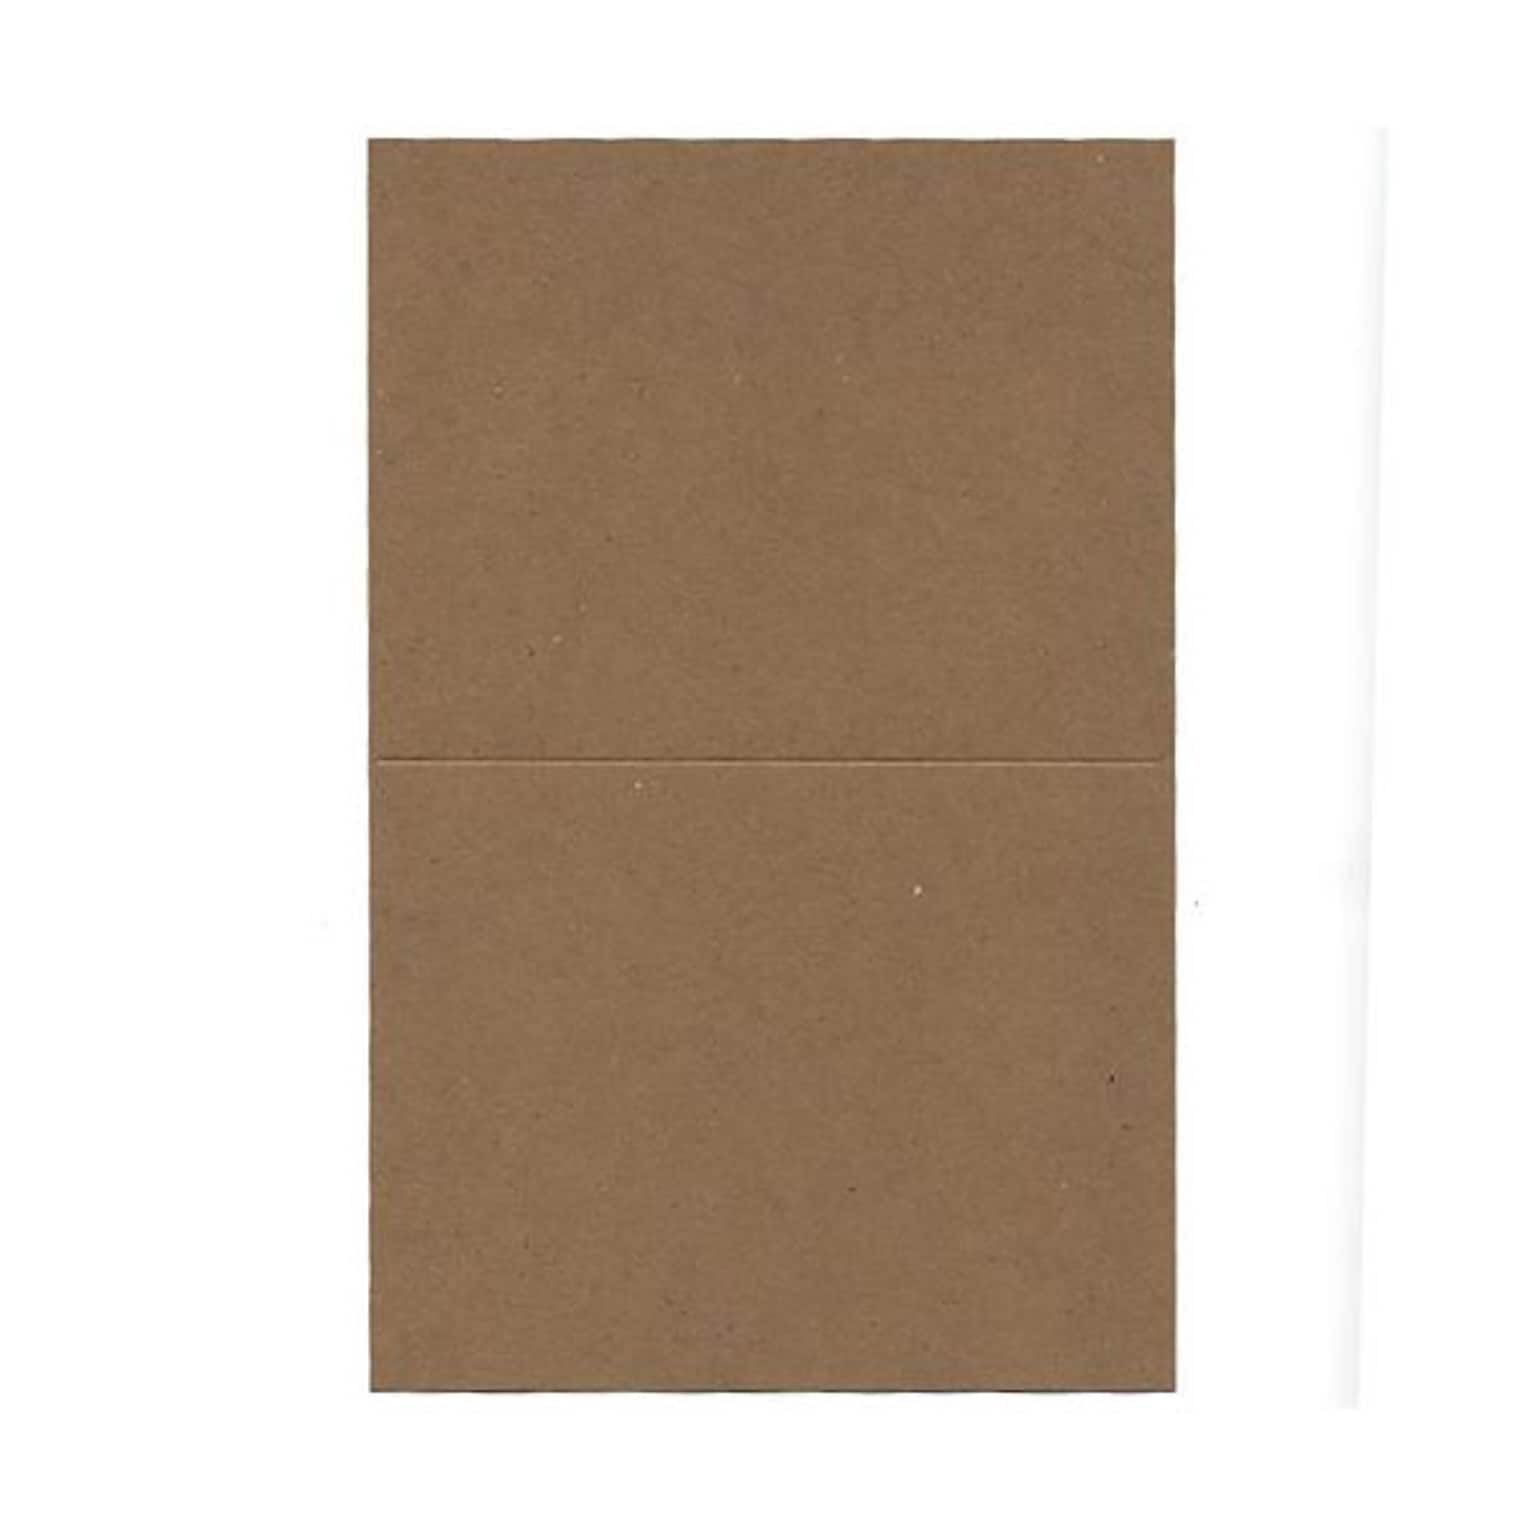 JAM Paper® Blank Foldover Cards, A2 size, 4 3/8 x 5 7/16, 60lb Brown Kraft Paper Bag Recycled, 25/pack (530910828)